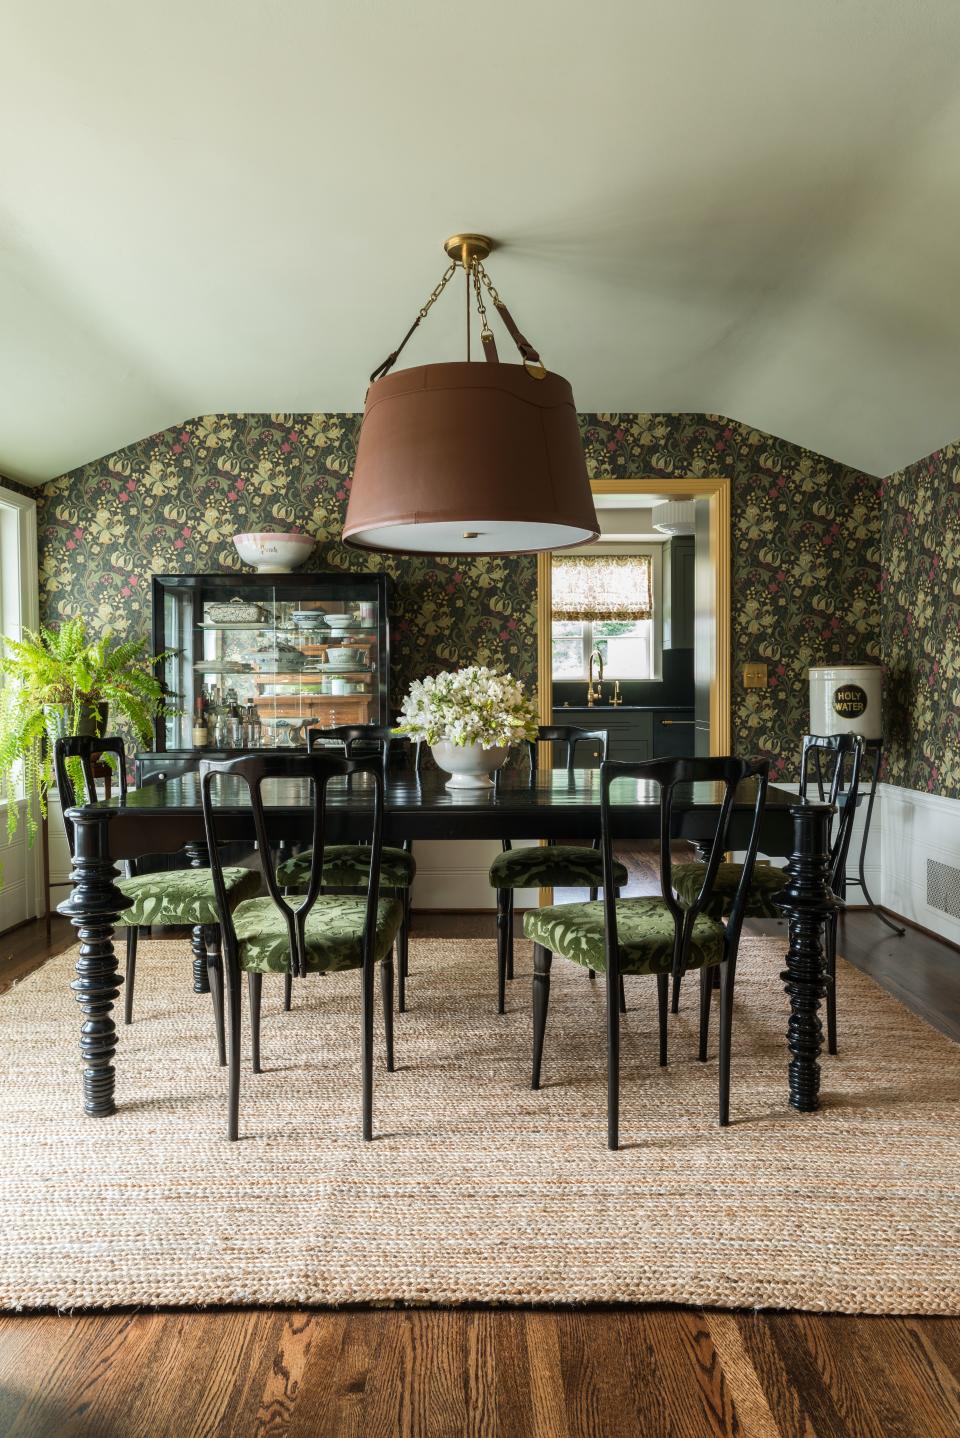 In the formal dining room of a home in Seattle’s Capitol Hill neighborhood, Studio Laloc paired the traditional arts and crafts style Morris & Co. wallpaper with furnishings that feel more modern in style, including midcentury Italian lacquered dining chairs upholstered in a cut House of Hackney velvet and a lacquered metal china cabinet. The large-scale equestrian-style pendant breaks up the black furnishings.